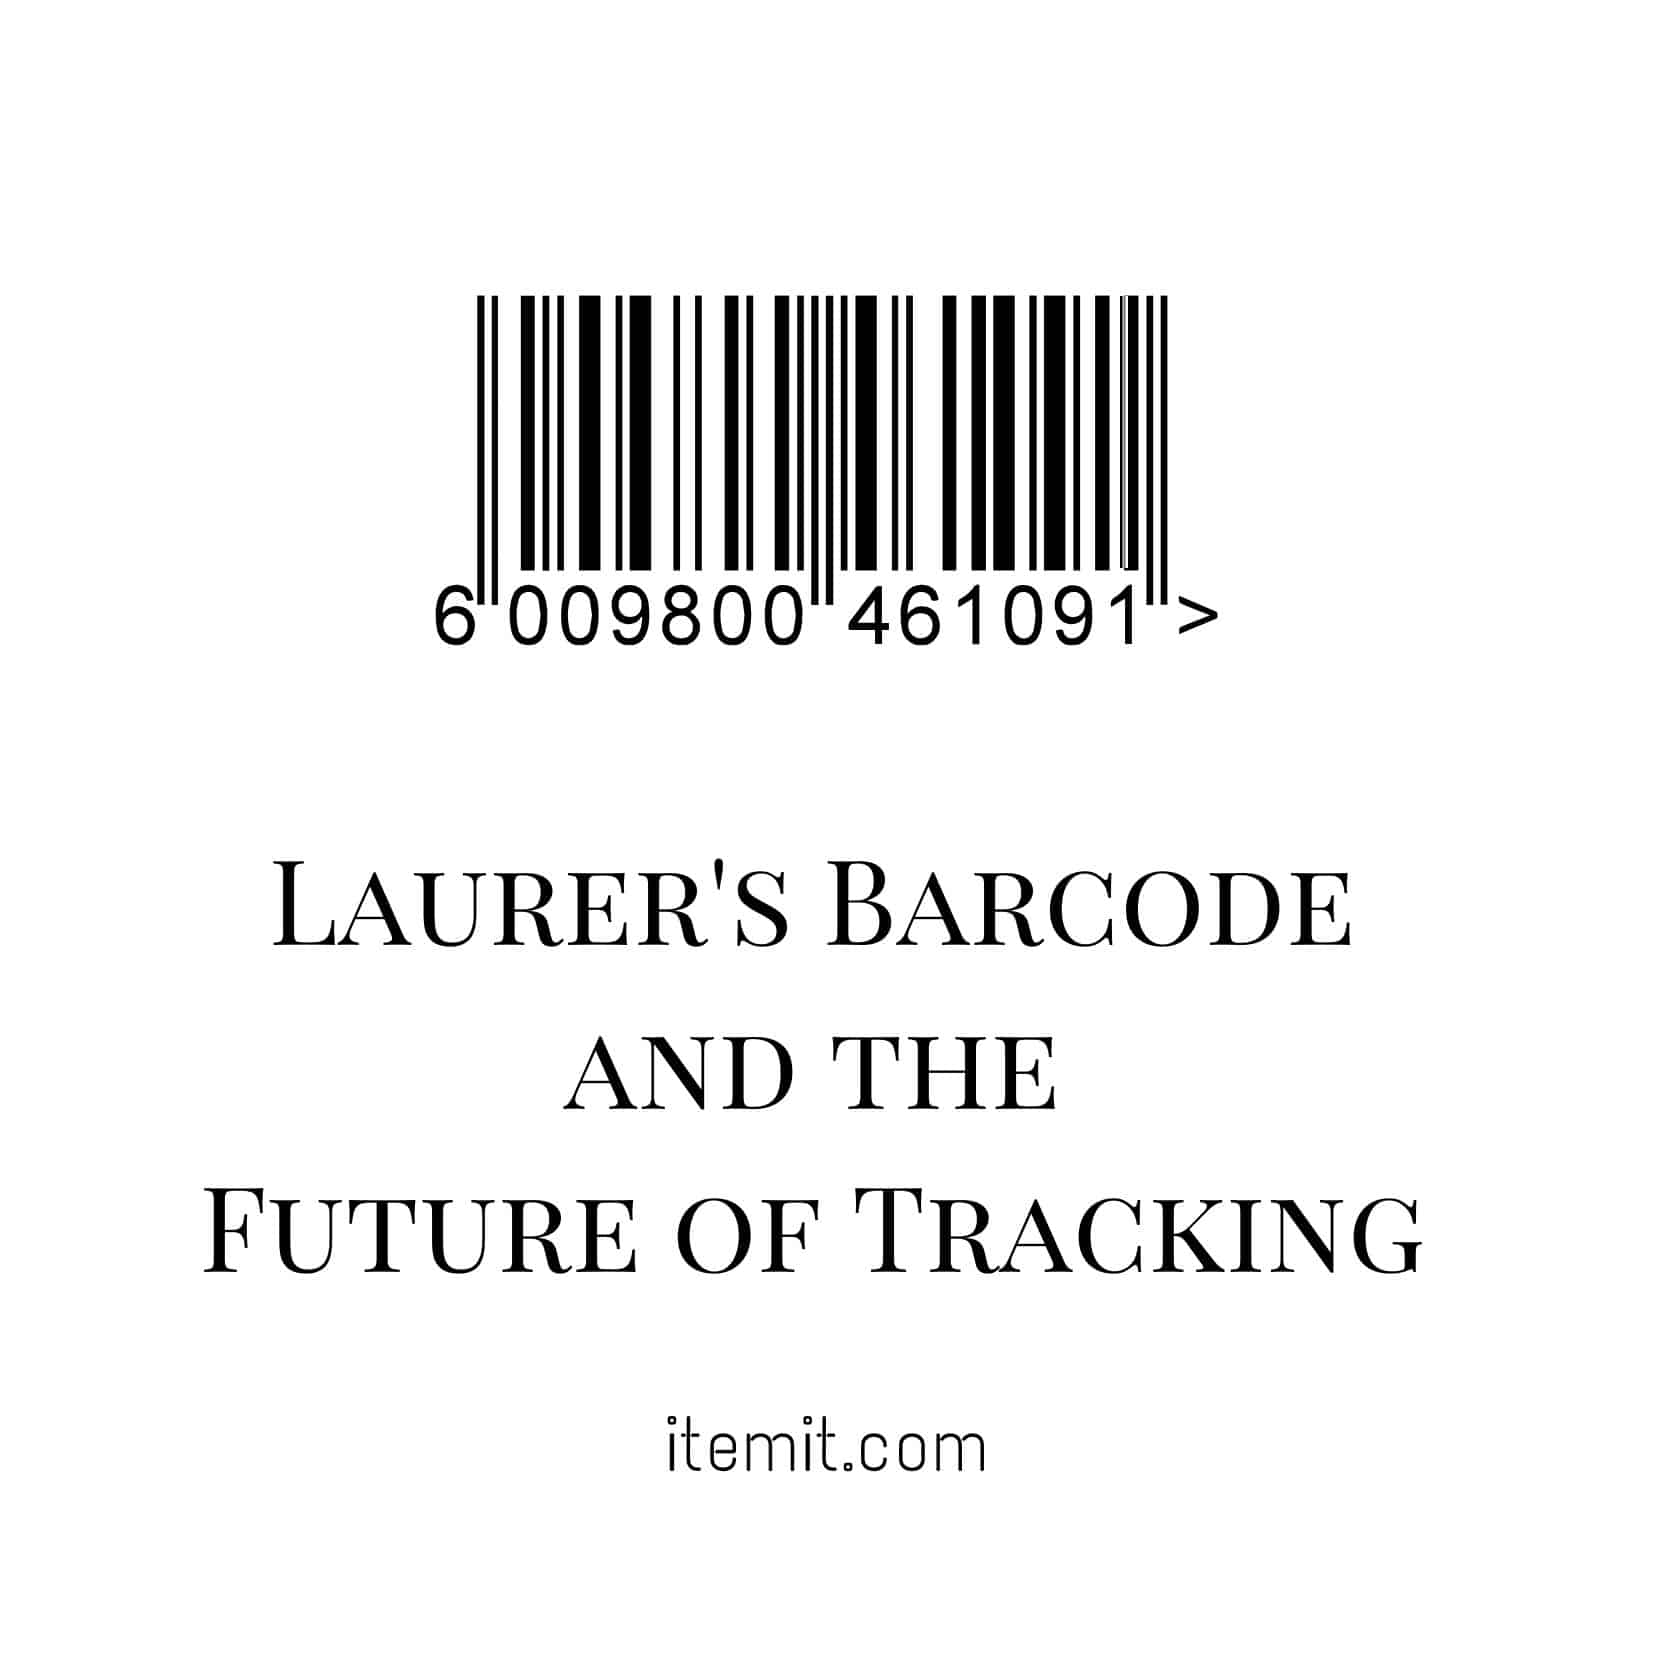 barcodes and asset tracking software